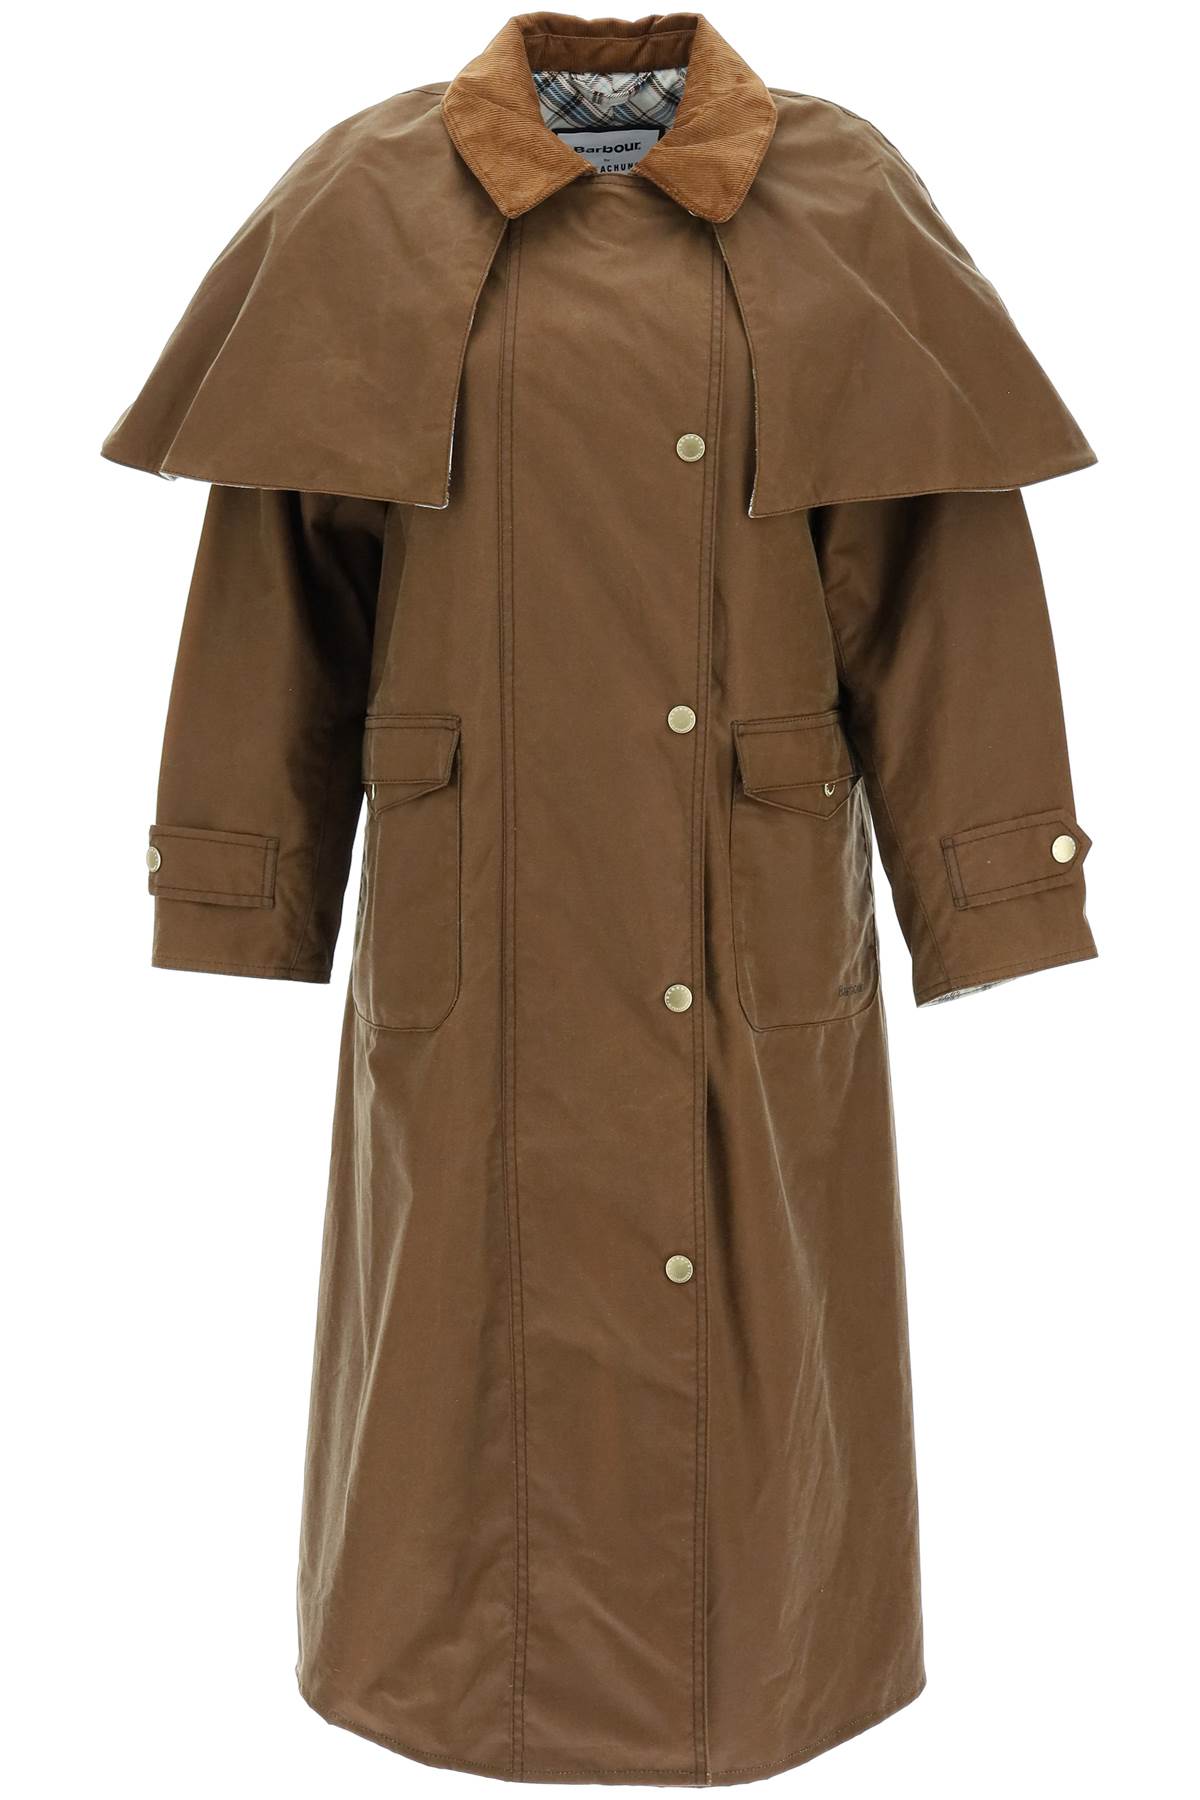 Barbour elizabeth Waxed Cotton Trench